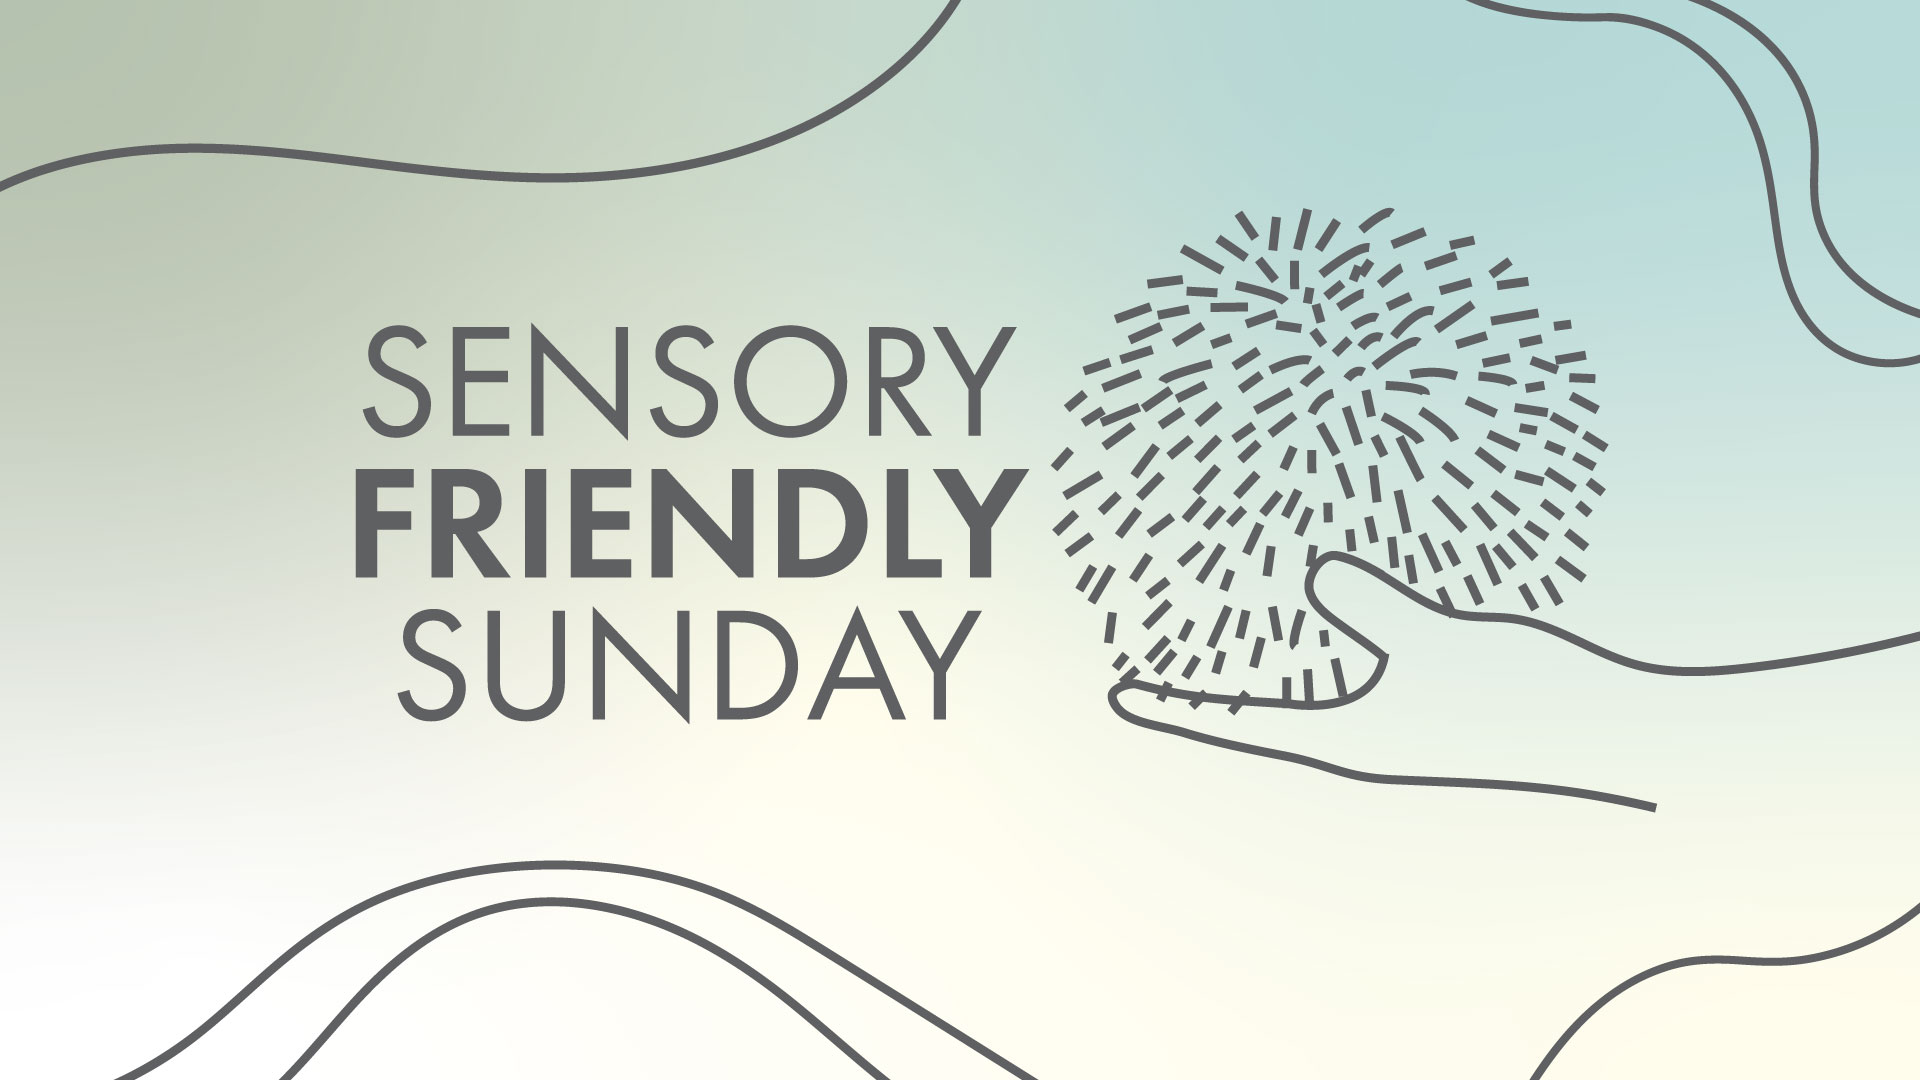 Sensory Friendly Sunday: graphic with pastel gradient background and gray line work of a hand holding a squishy toy